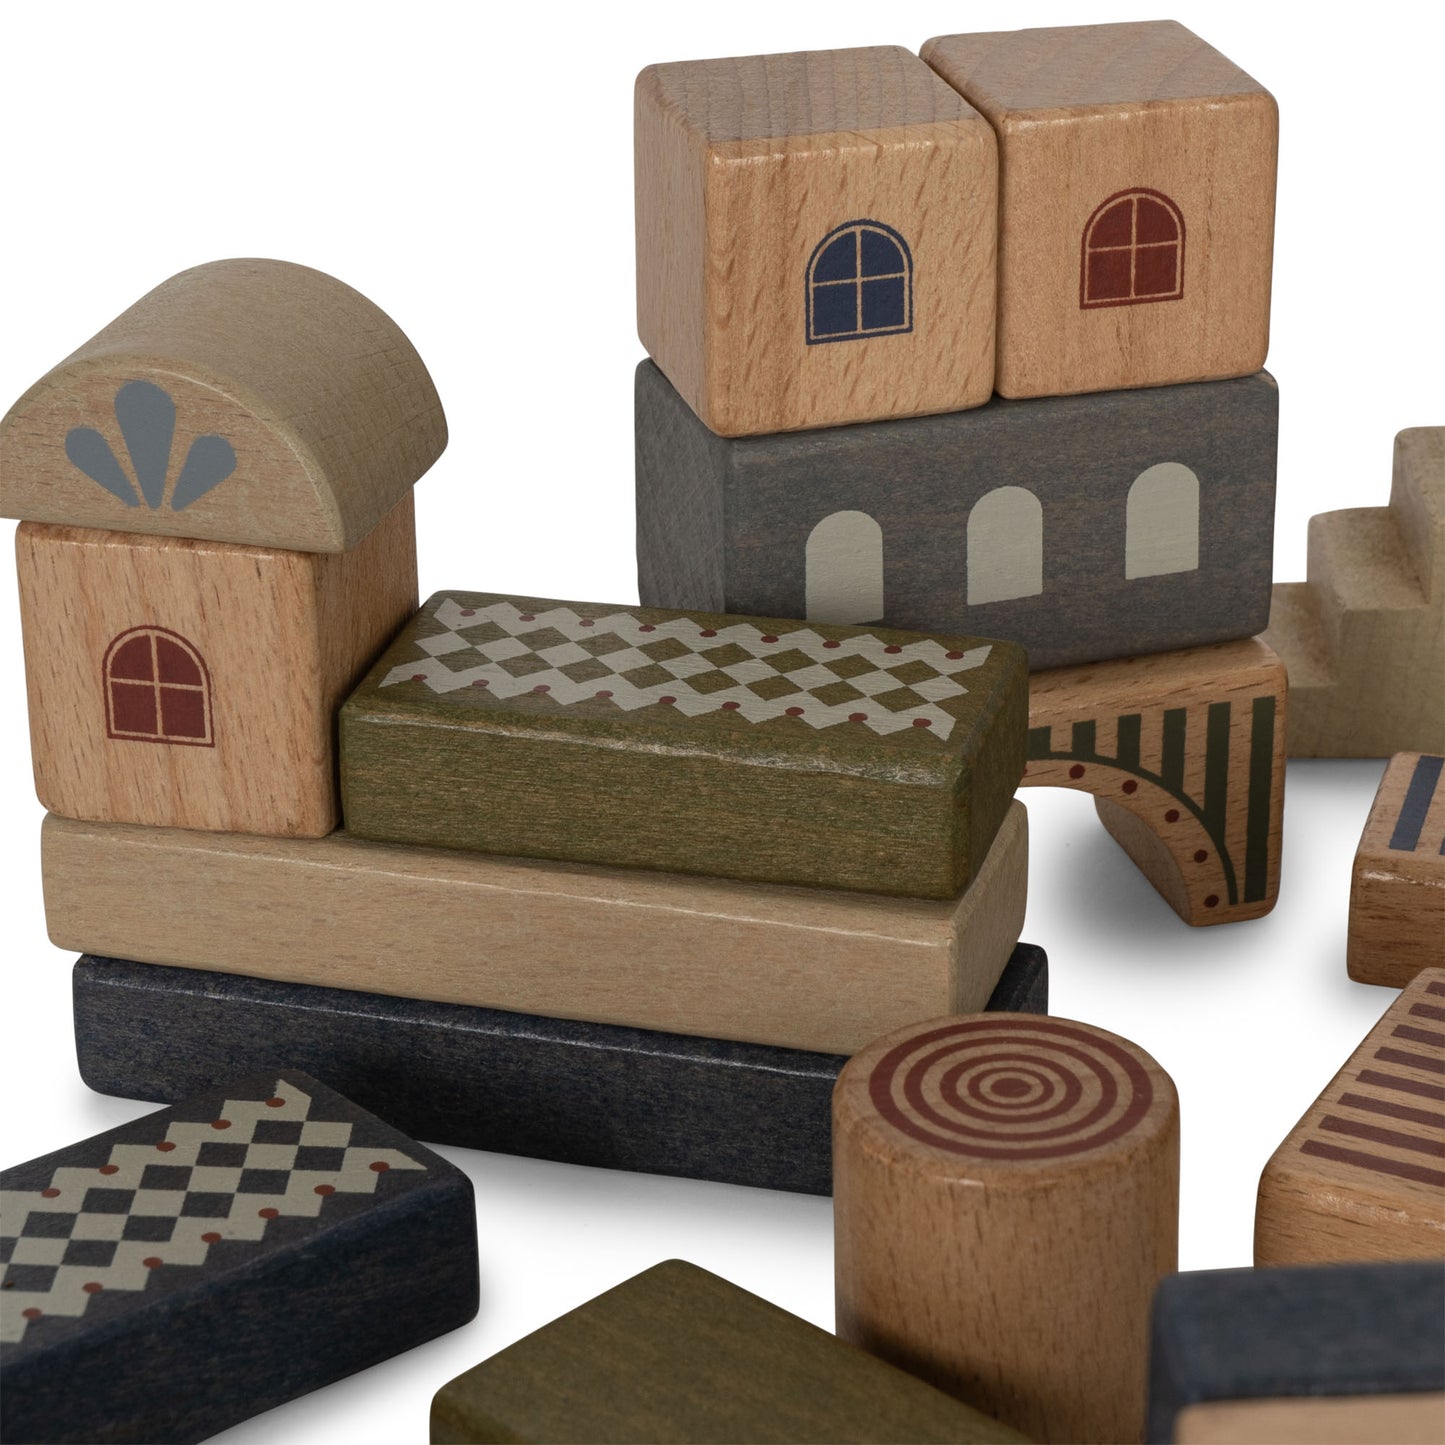 Wooden Building Blocks with Prints